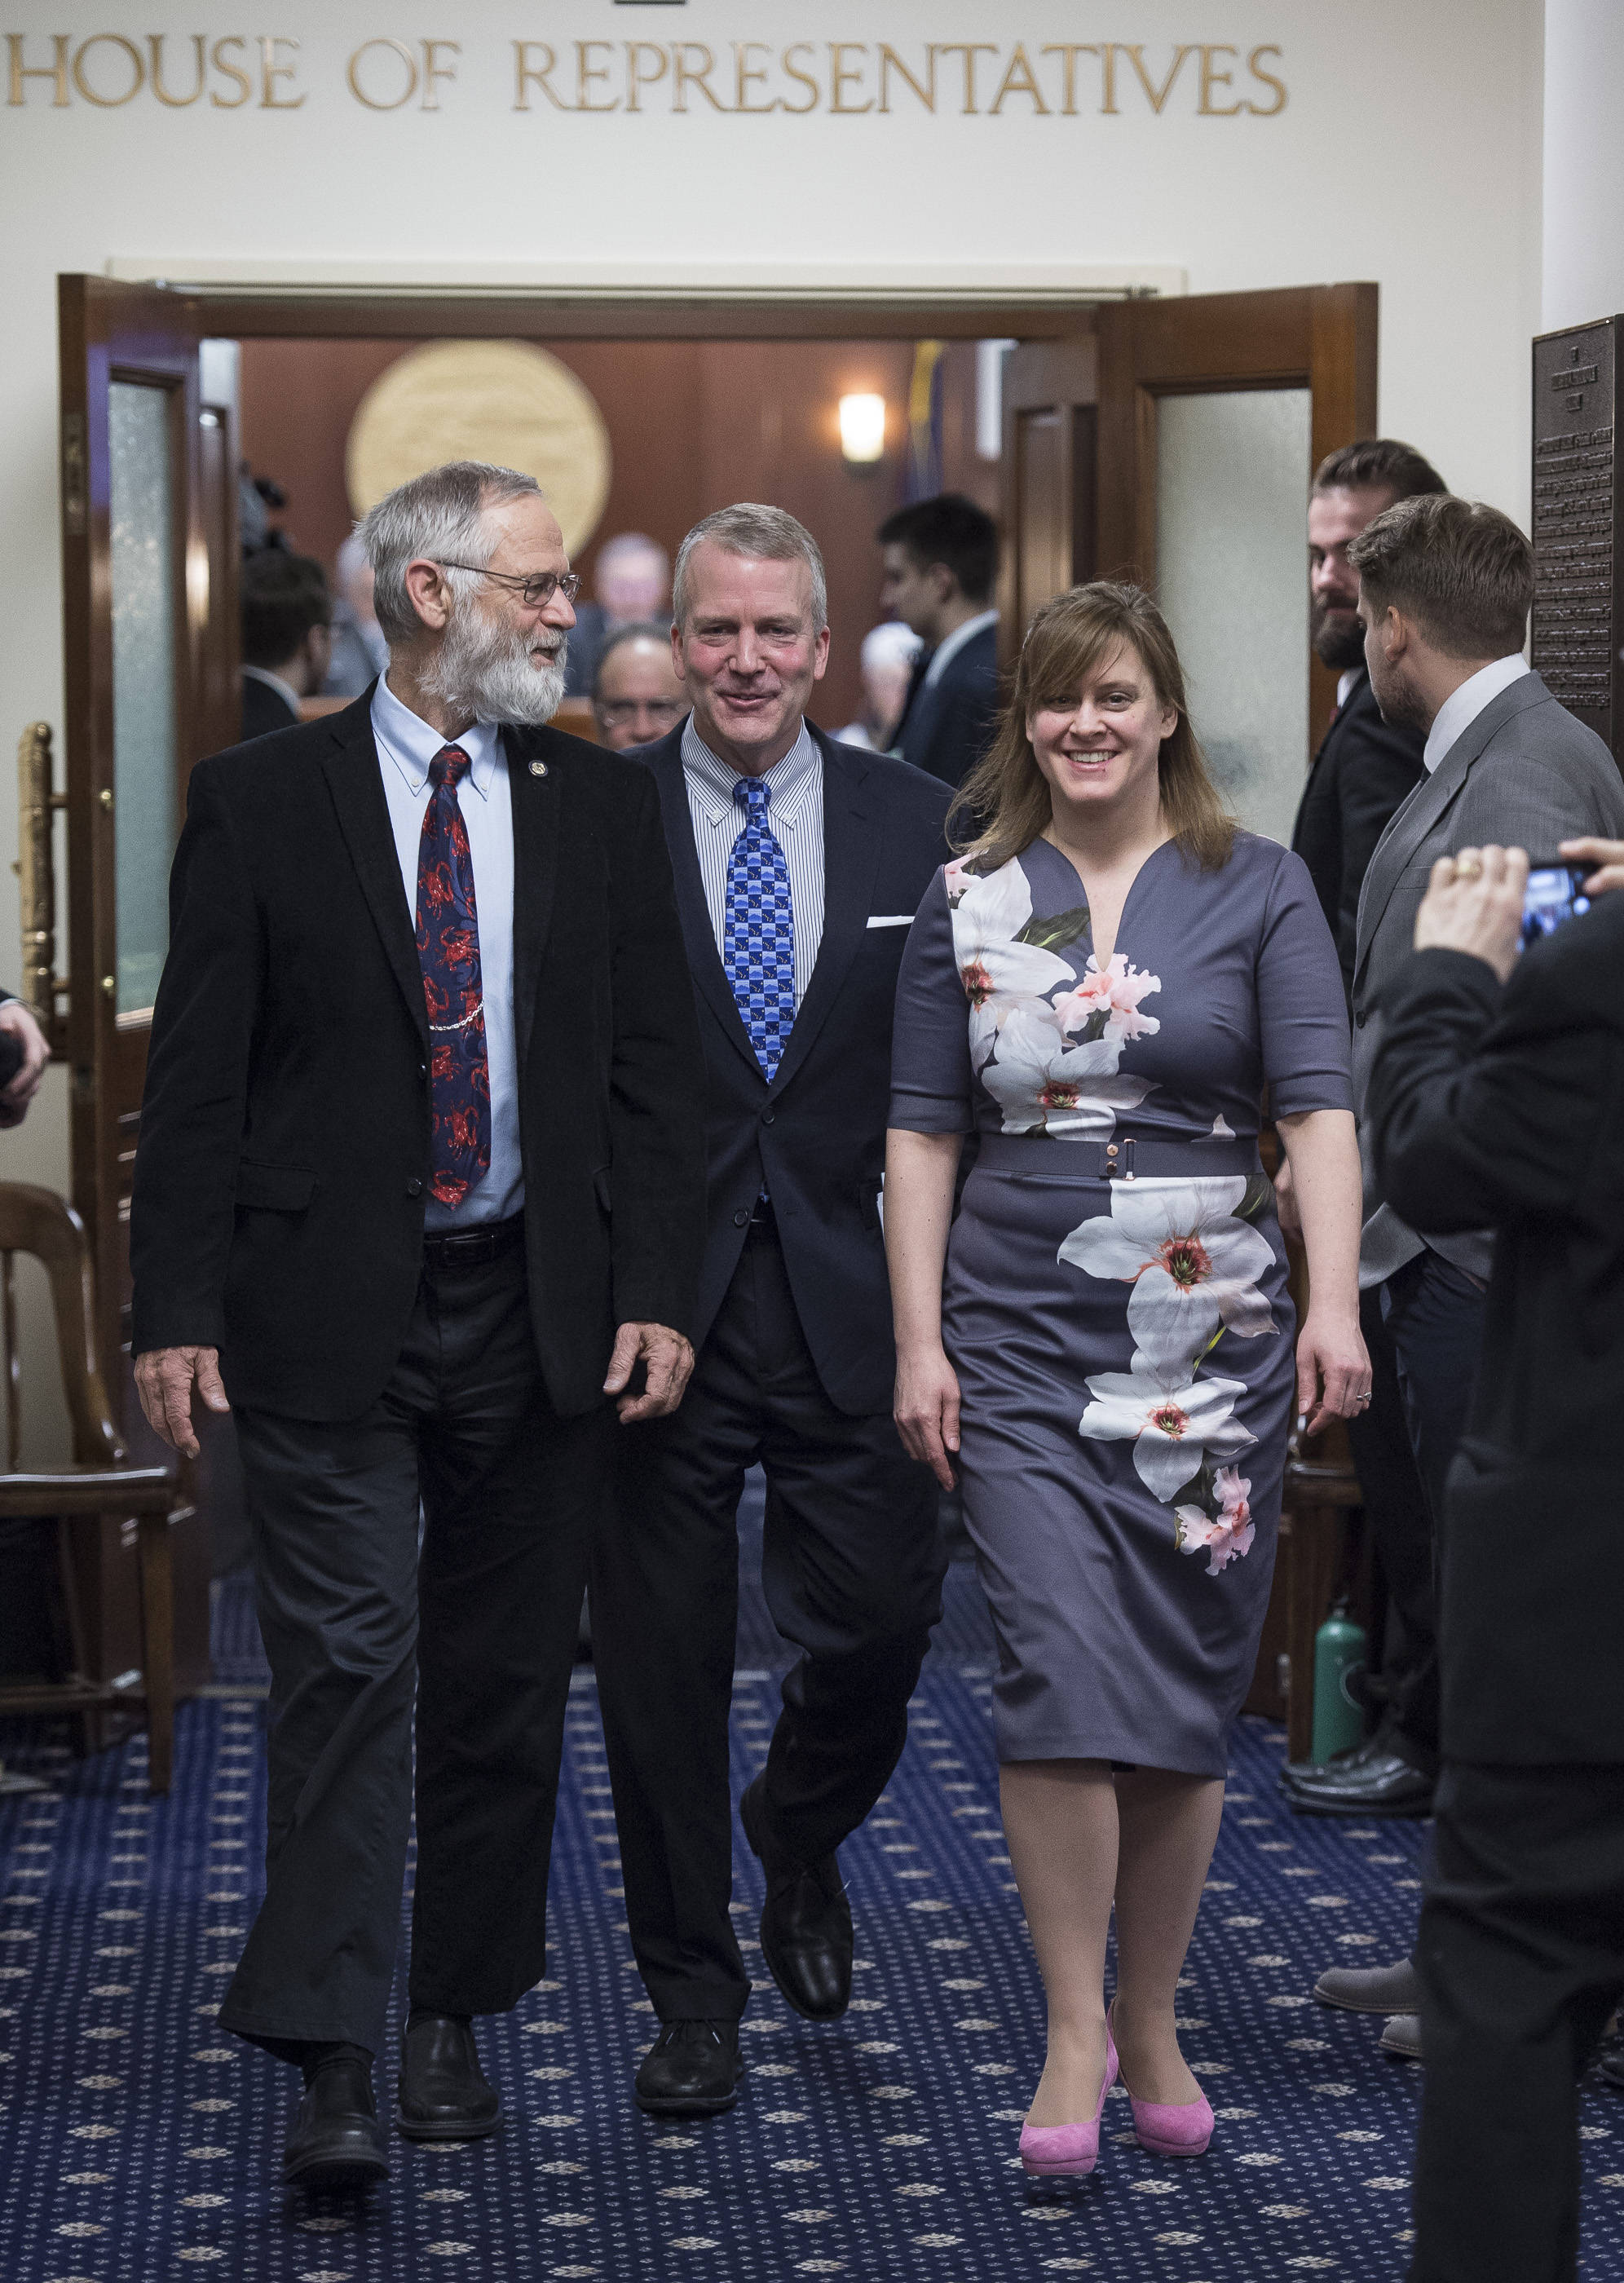 U.S. Sen. Dan Sullivan, R-Alaska, center, is escorted out of the House of Representatives by Rep. Paul Seaton, R-Homer, left, and Sen. Mia Costello, R-Anchorage, after his annual speech to a joint session of the Alaska Legislature at the Capitol on Monday, Feb. 26, 2018. (Michael Penn | Juneau Empire)